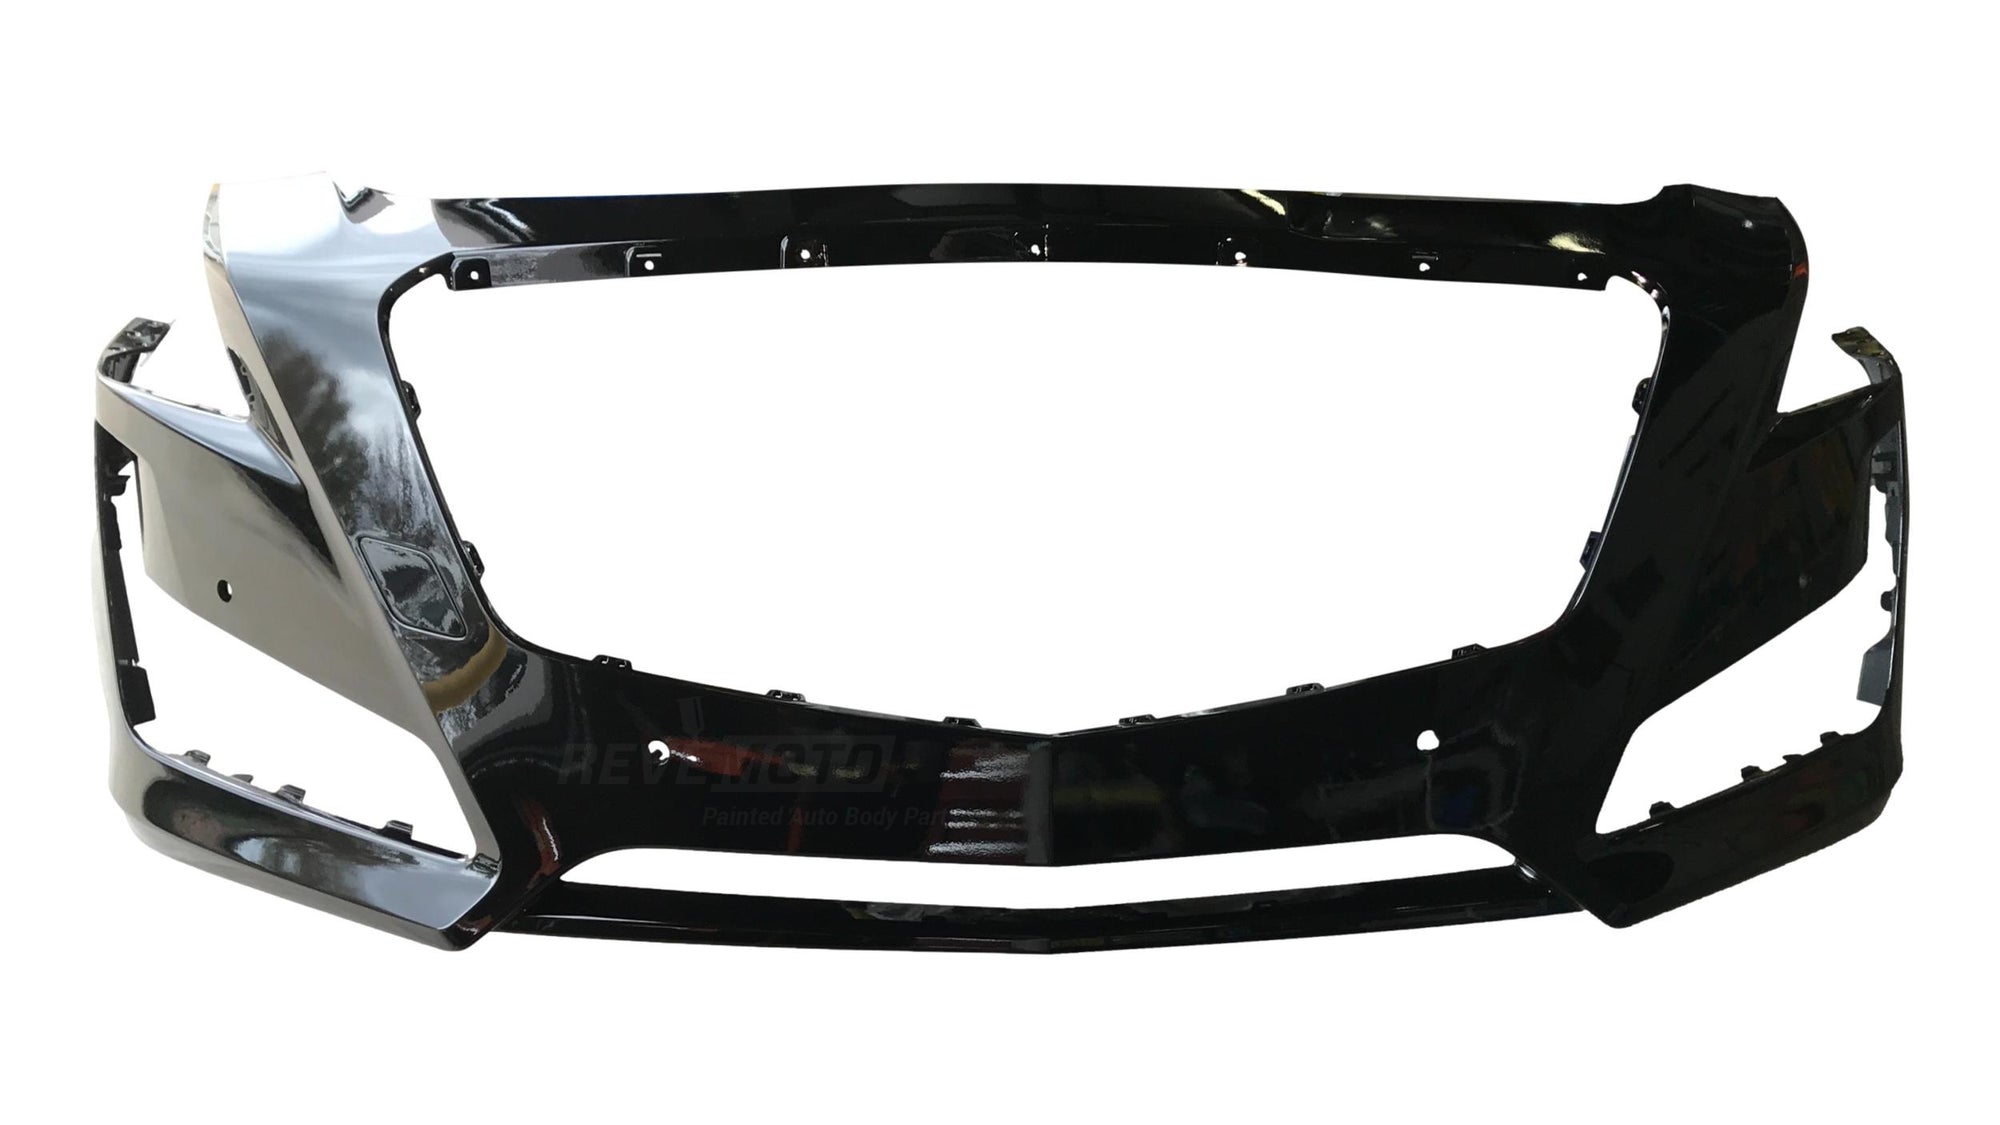 2014-2019 Cadillac CTS Front Bumper Painted (WITH: Collision Alert and Park Assist Sensor Holes) Black (WA8555) 84033408 GM1000958